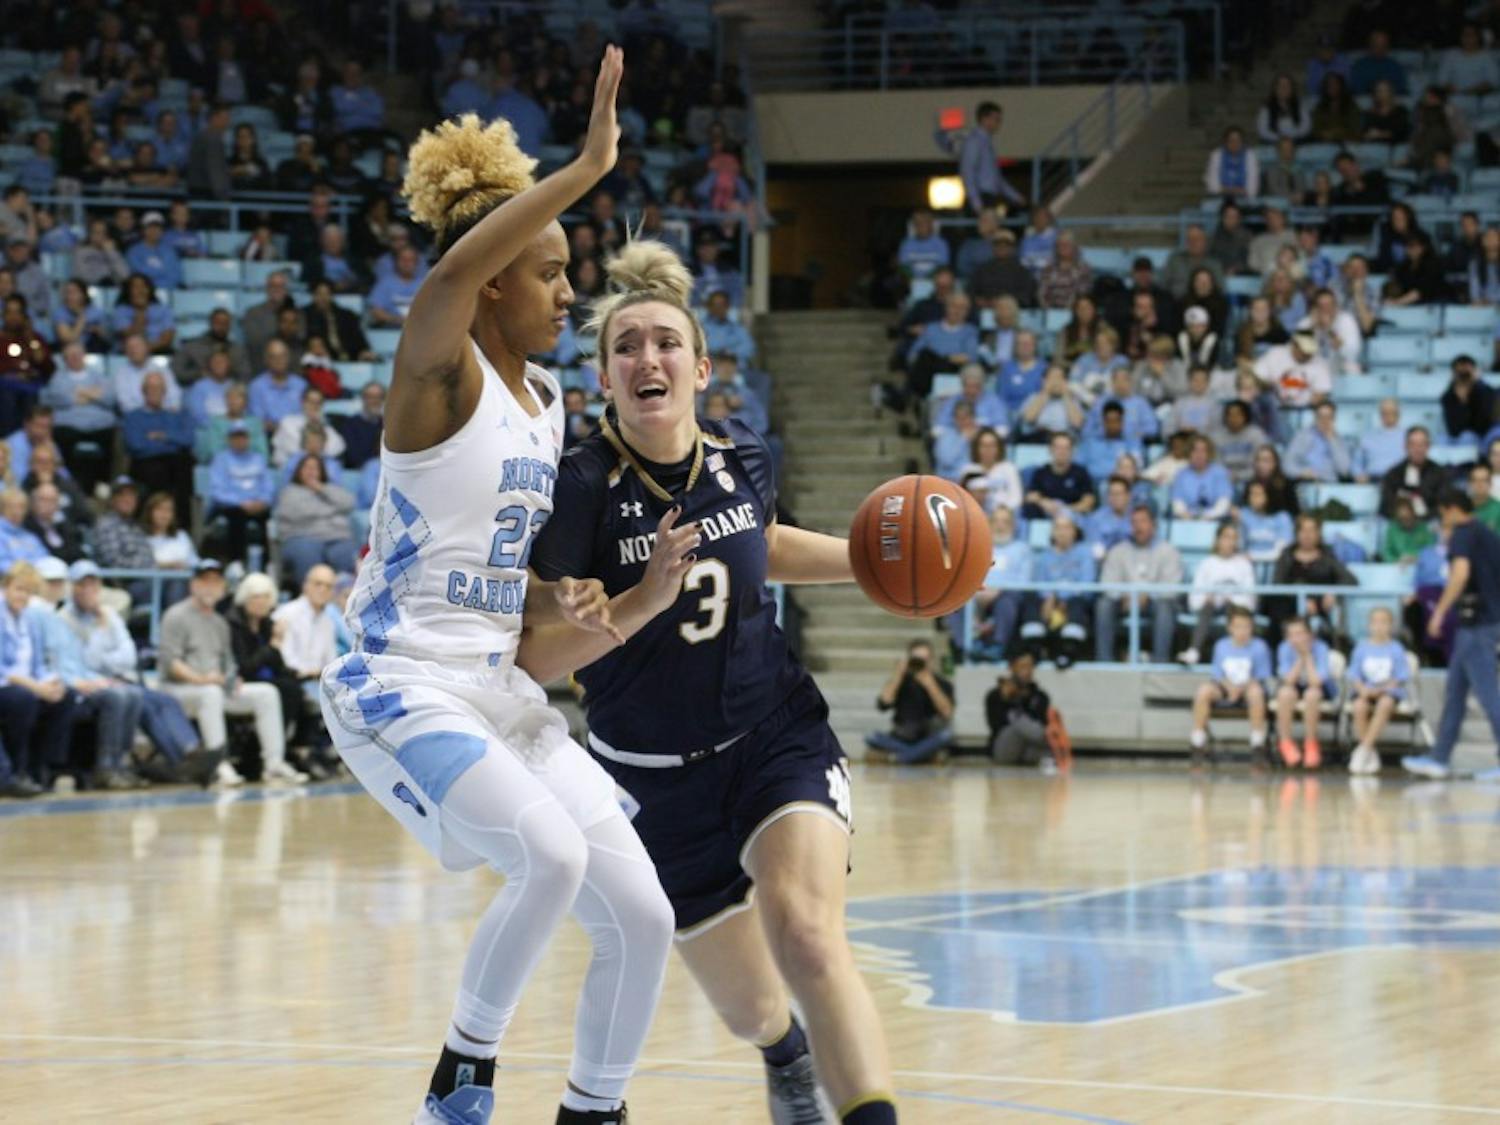 Redshirt senior guard Paris Kea (22) protects the rim against Notre Dame senior guard Marina Mabrey (3) in a UNC upset in Carmichael Arena on Jan. 27, 2019. Kea finished the game with 30 points, 10 assists and 3 rebounds. UNC wins 78-73.